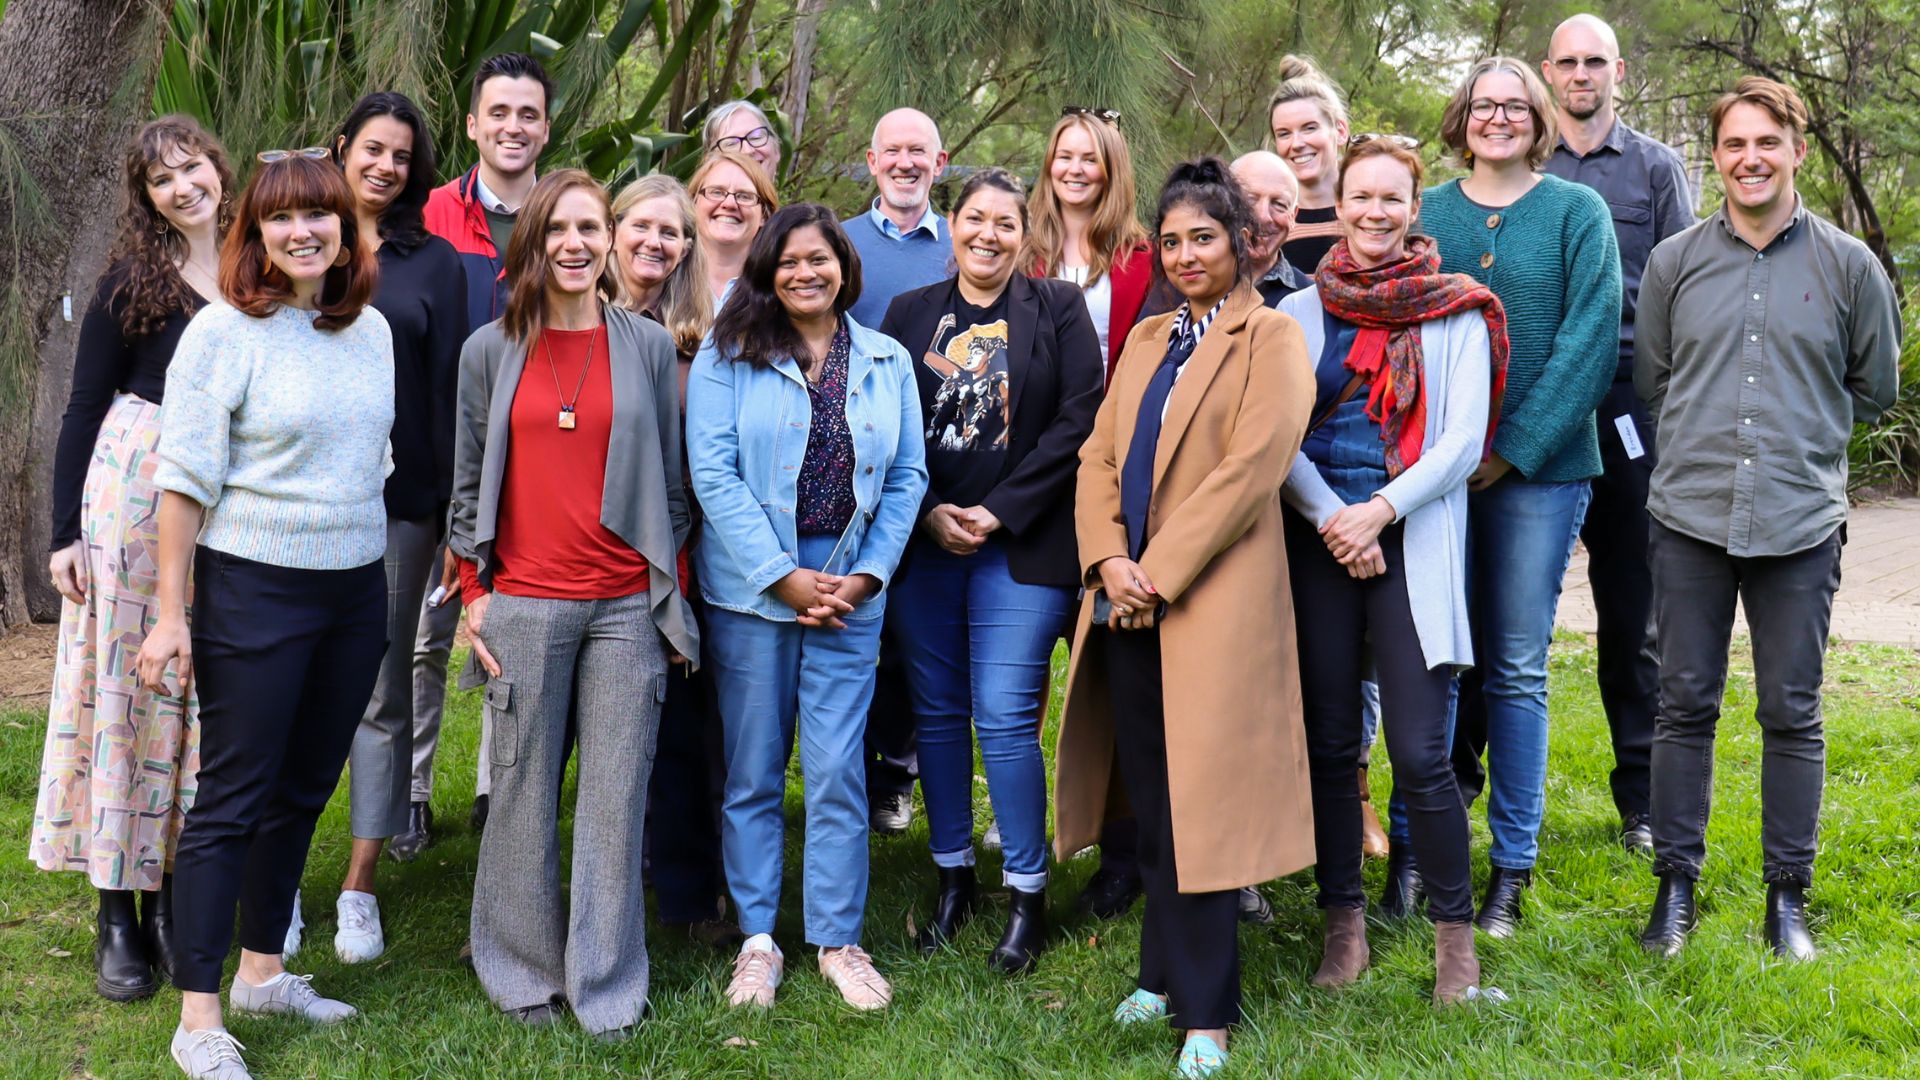 ACFID Staff smile in a grass outdoor area.